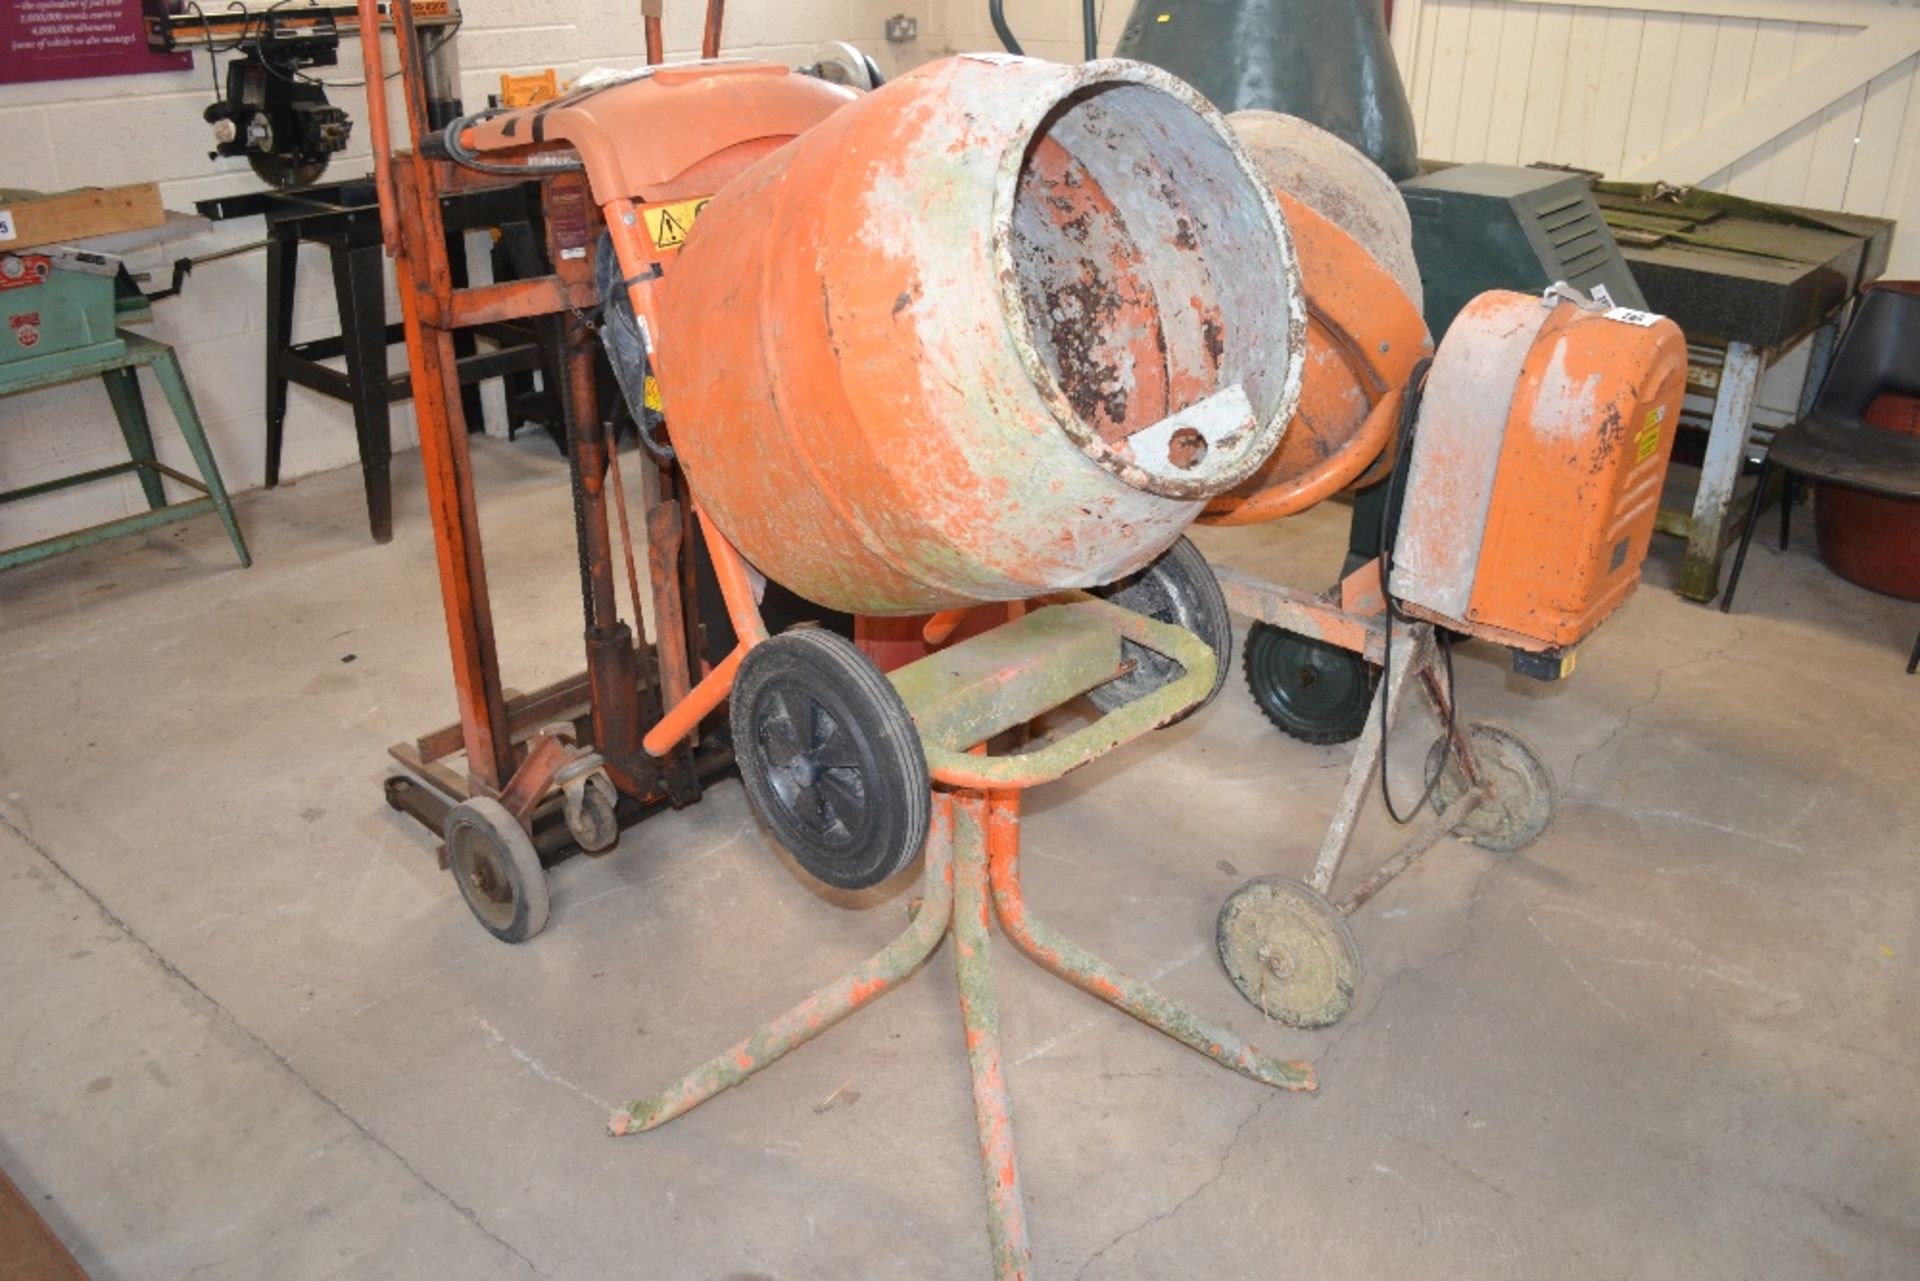 110V cement mixer with stand.